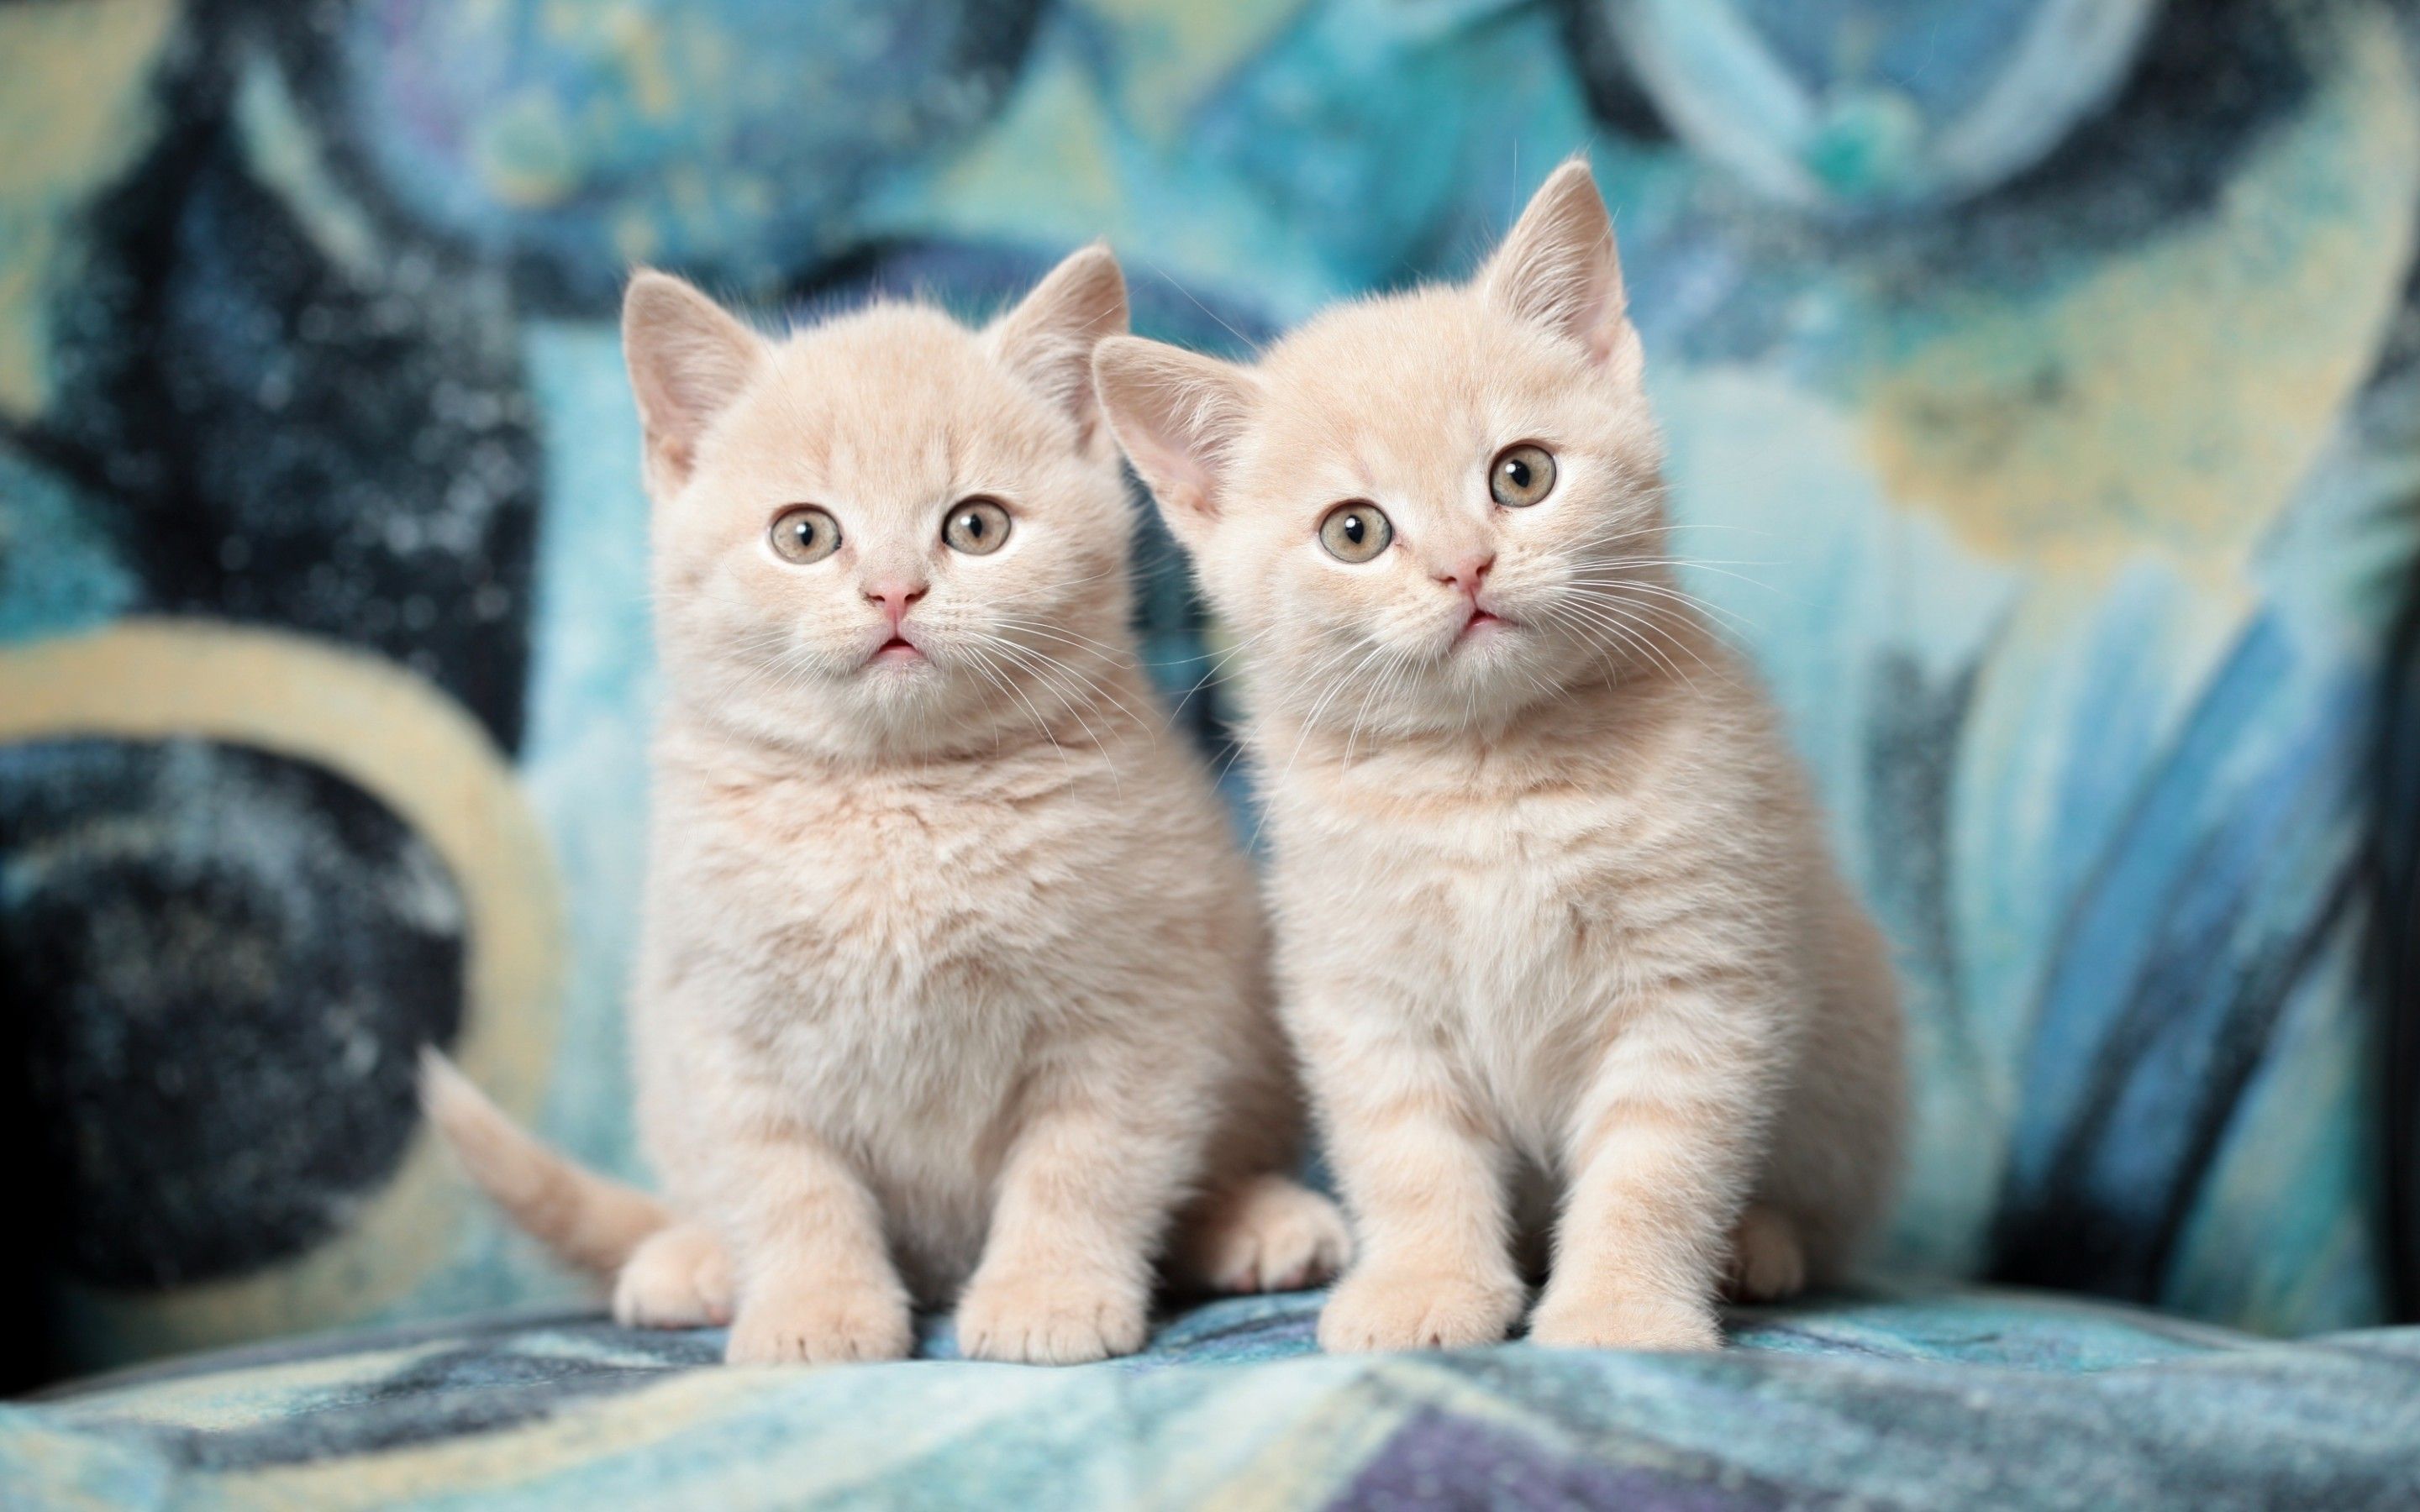 Download 2880x1800 Kittens, Adorable, Fluffy, Cute, Cats Wallpaper for MacBook Pro 15 inch